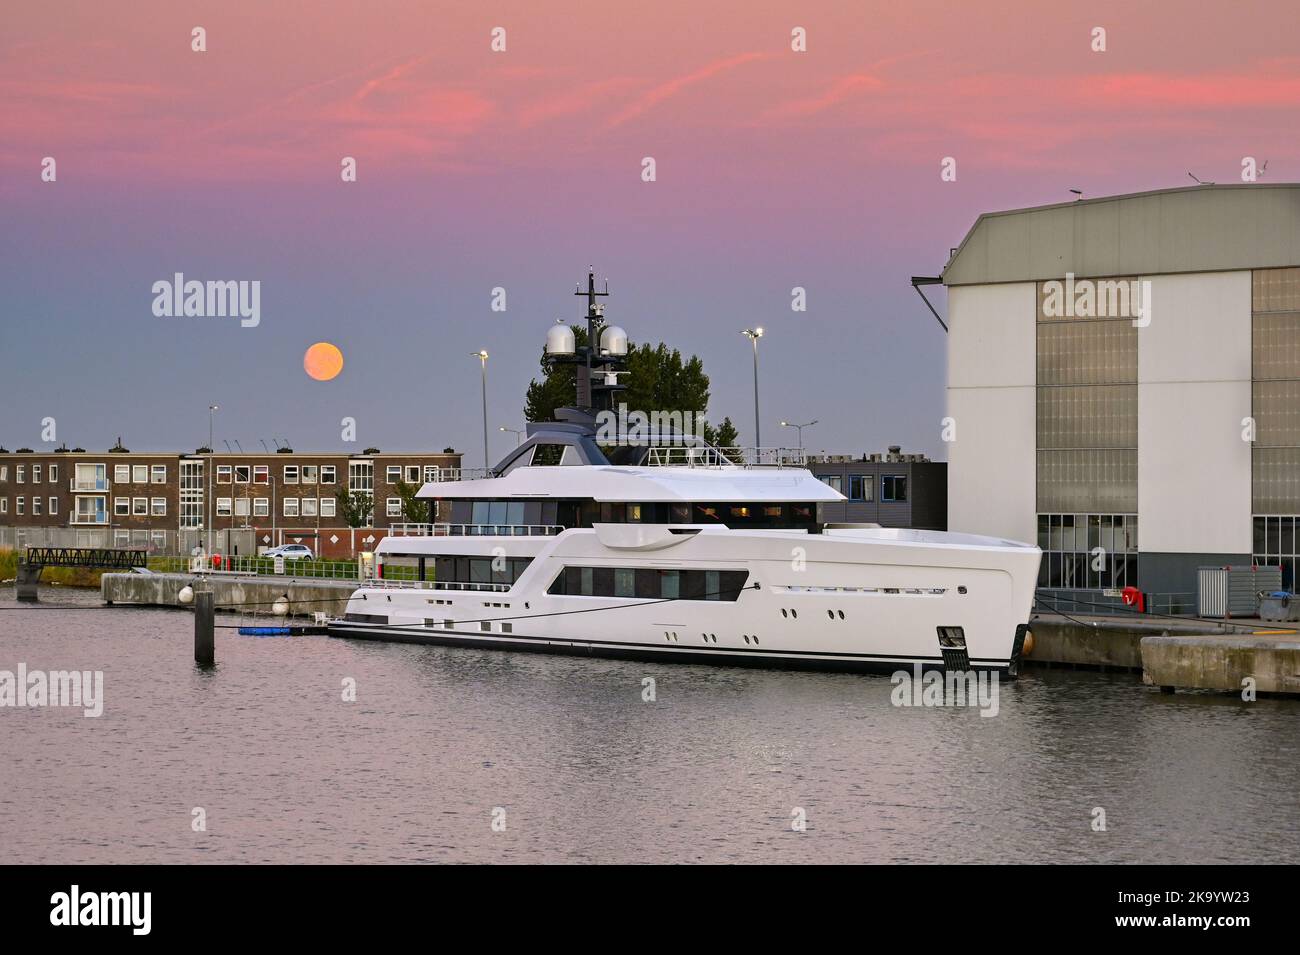 Vlissingen, Netherlands - August 2022: New luxury super yacht moored outside the Damen yachting factory at dusk with the moon in the sky Stock Photo